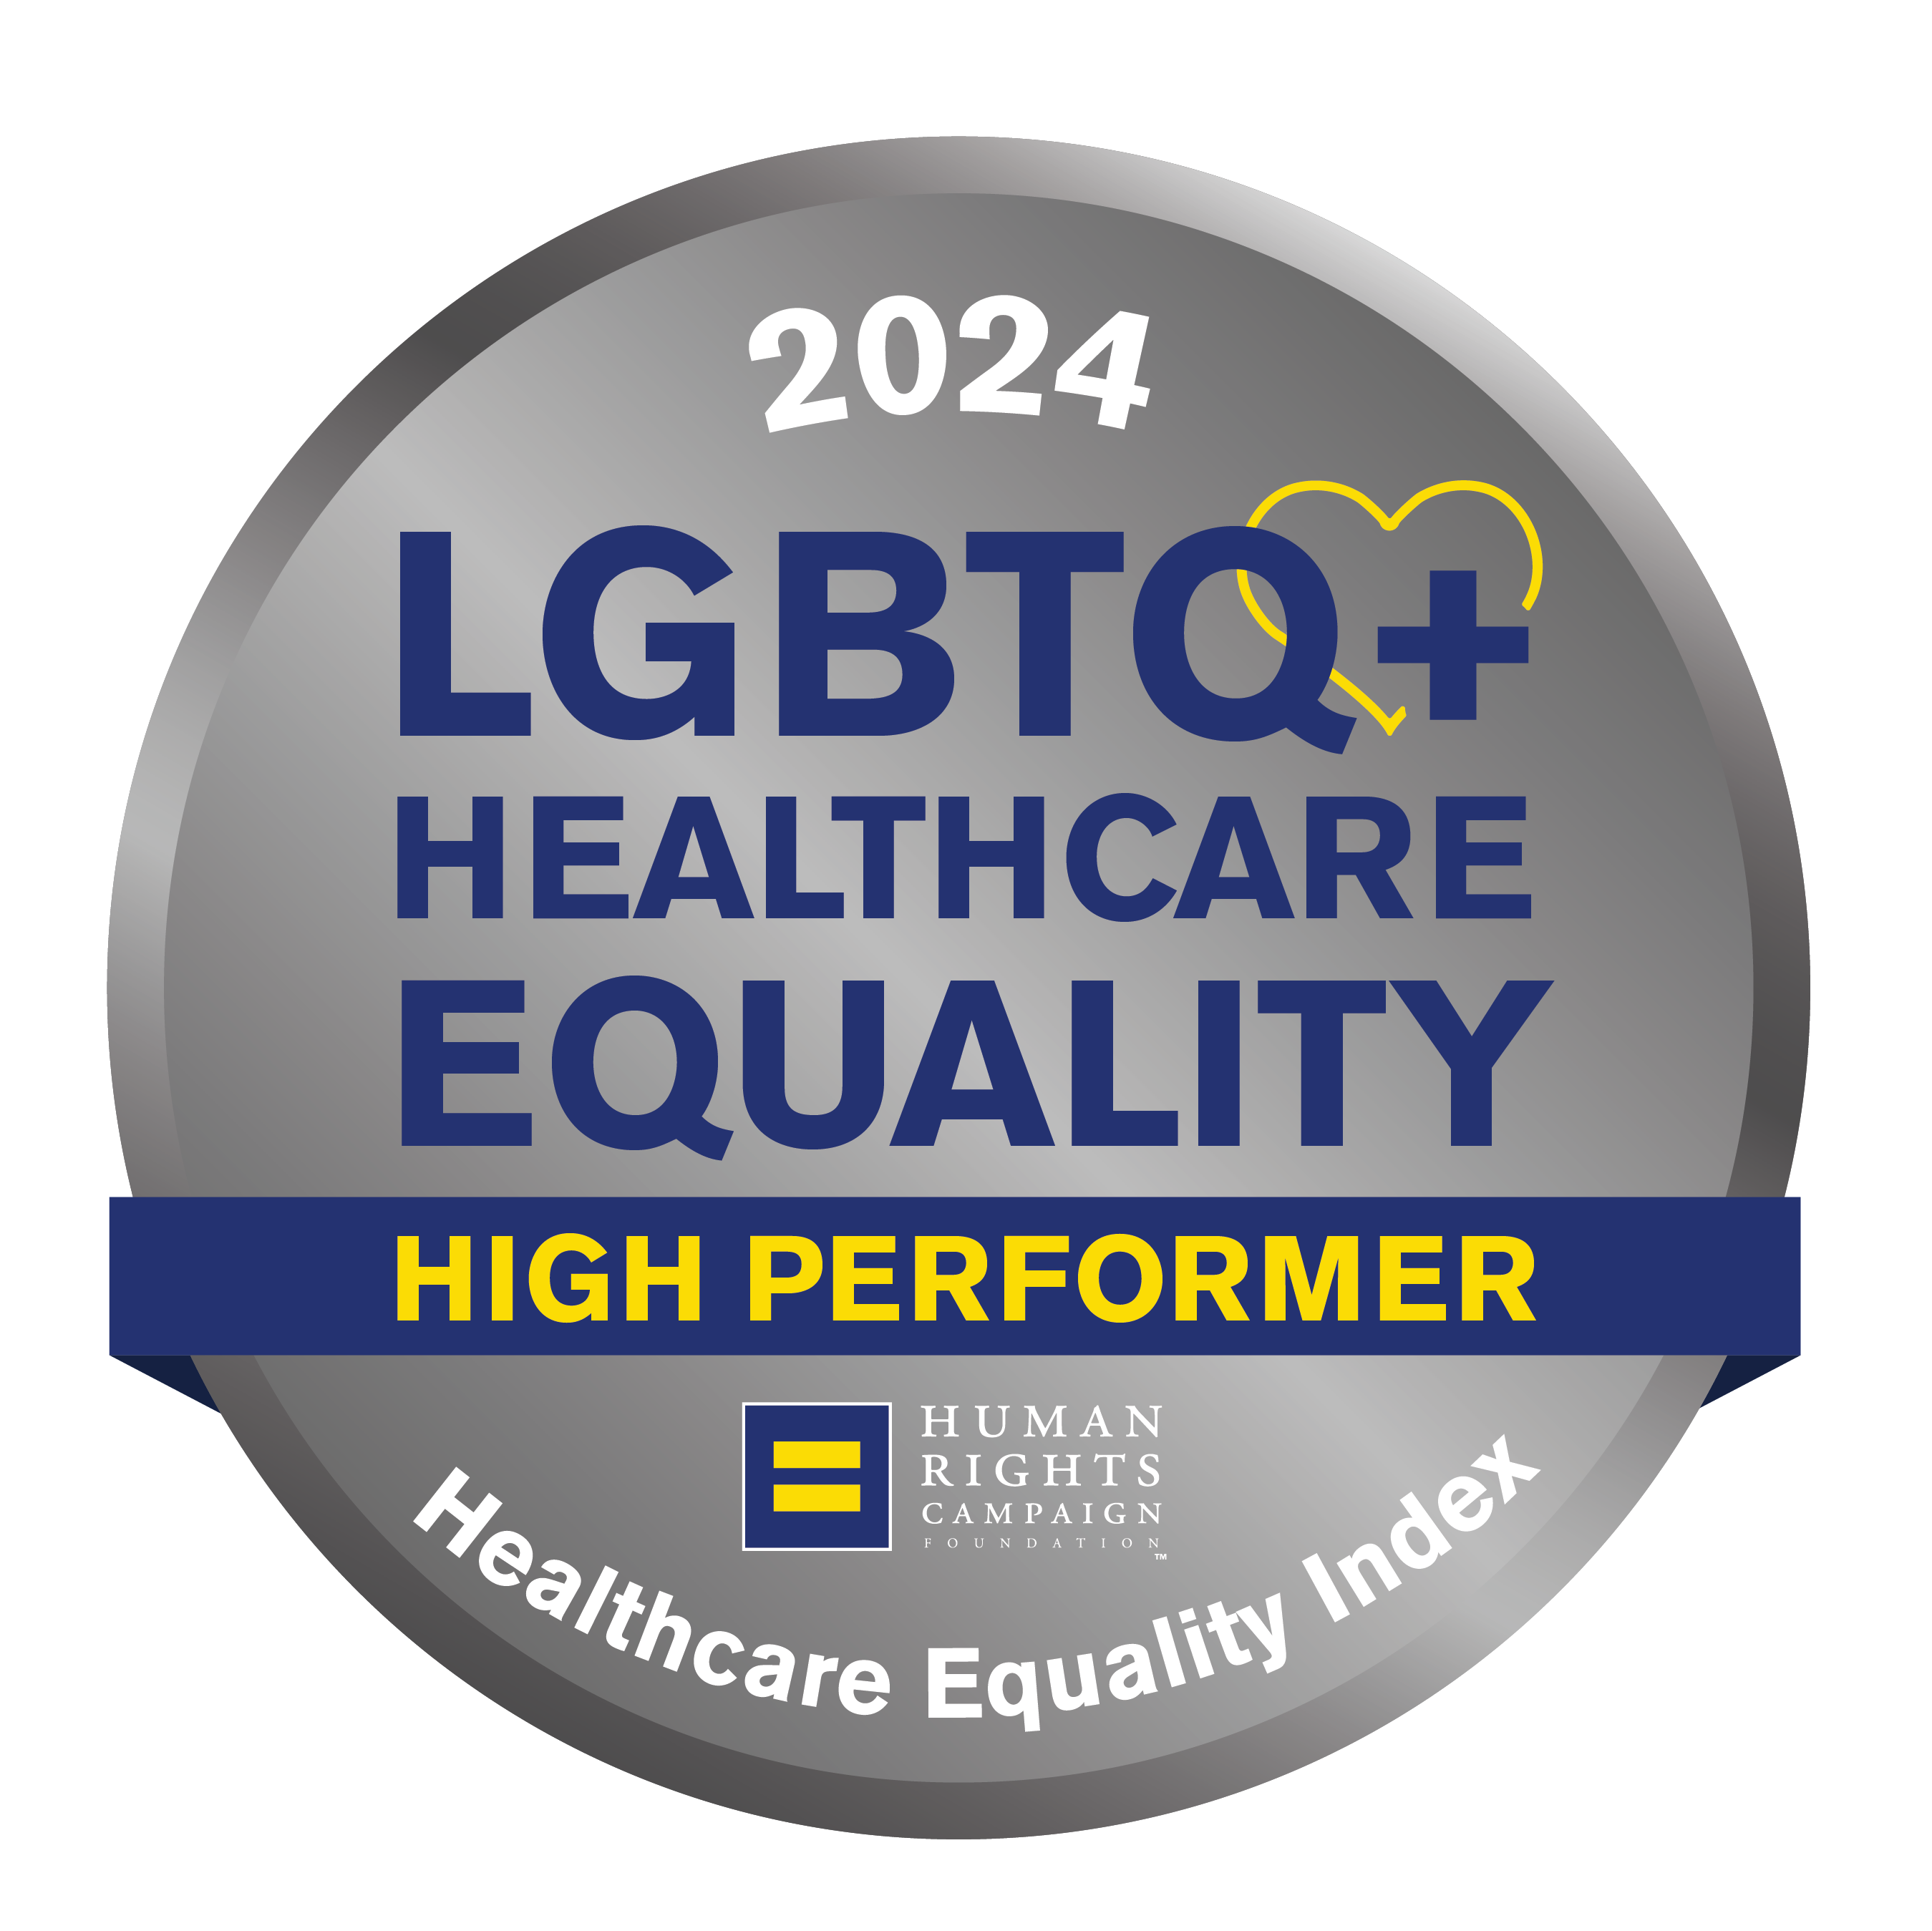 Healthcare Equality Index LGBTQ+ Healthcare Equality Leader 2024 badge